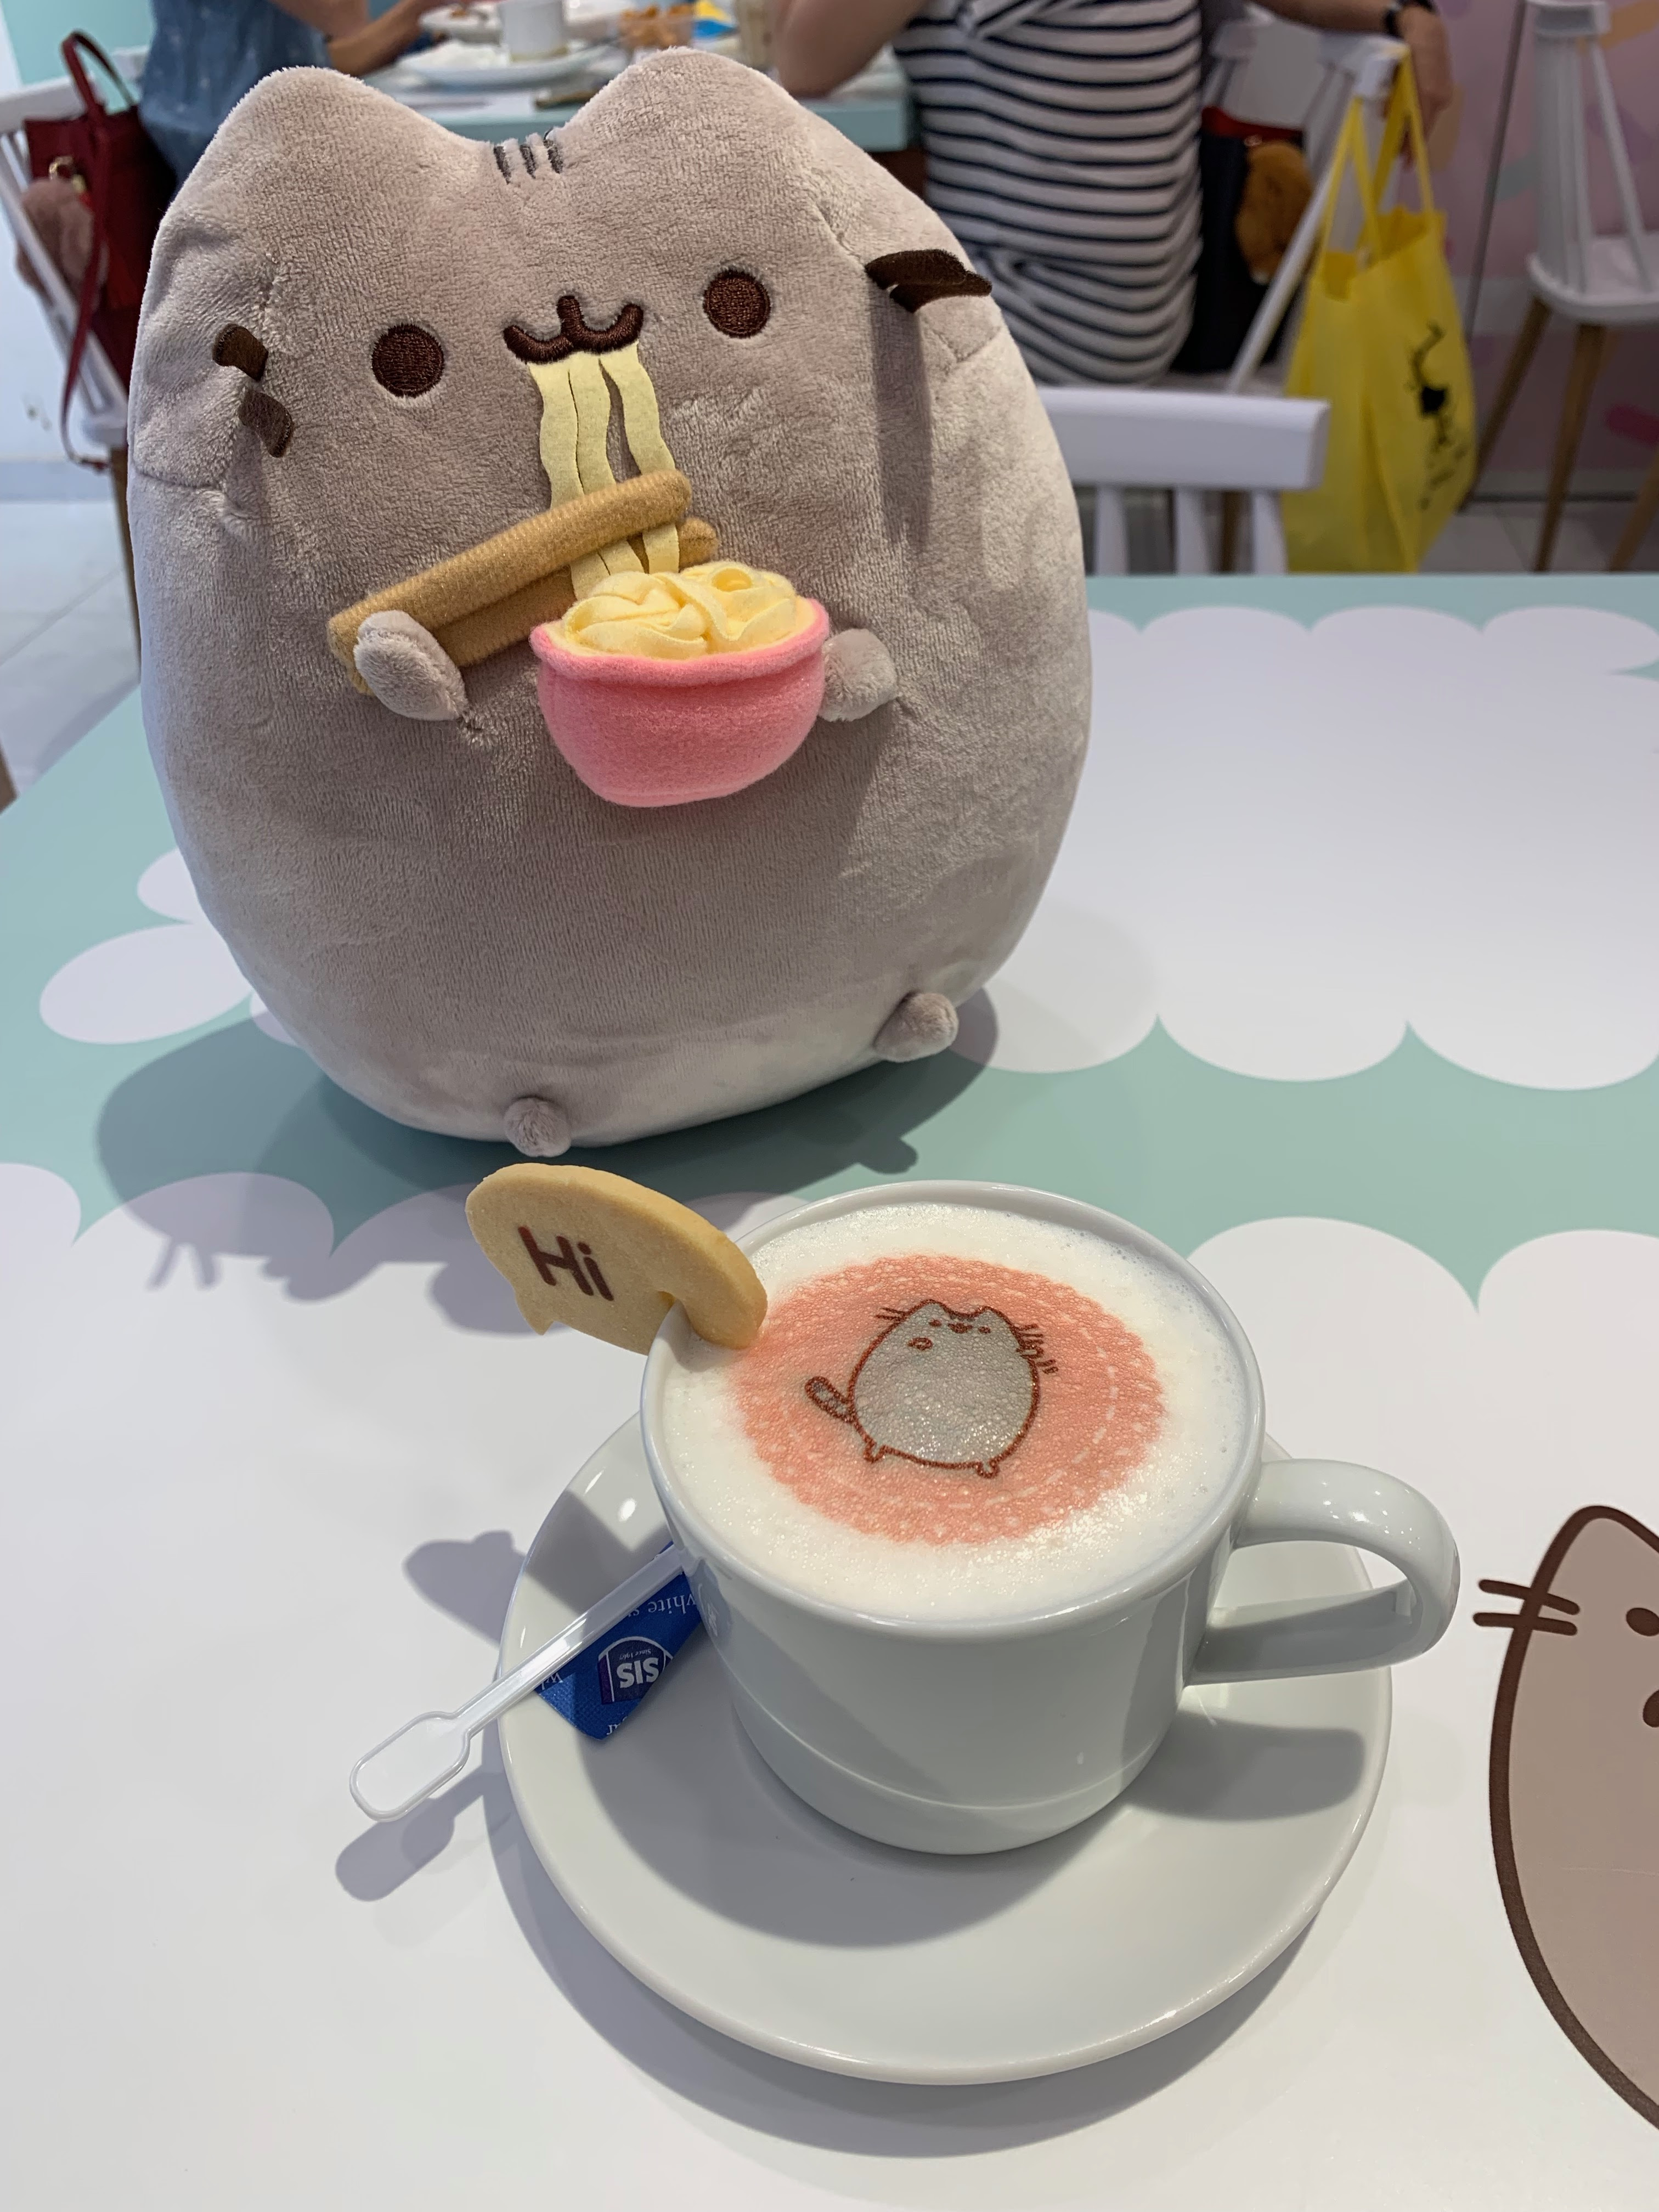 We spent over $100 at the world's first Pusheen cafe ...